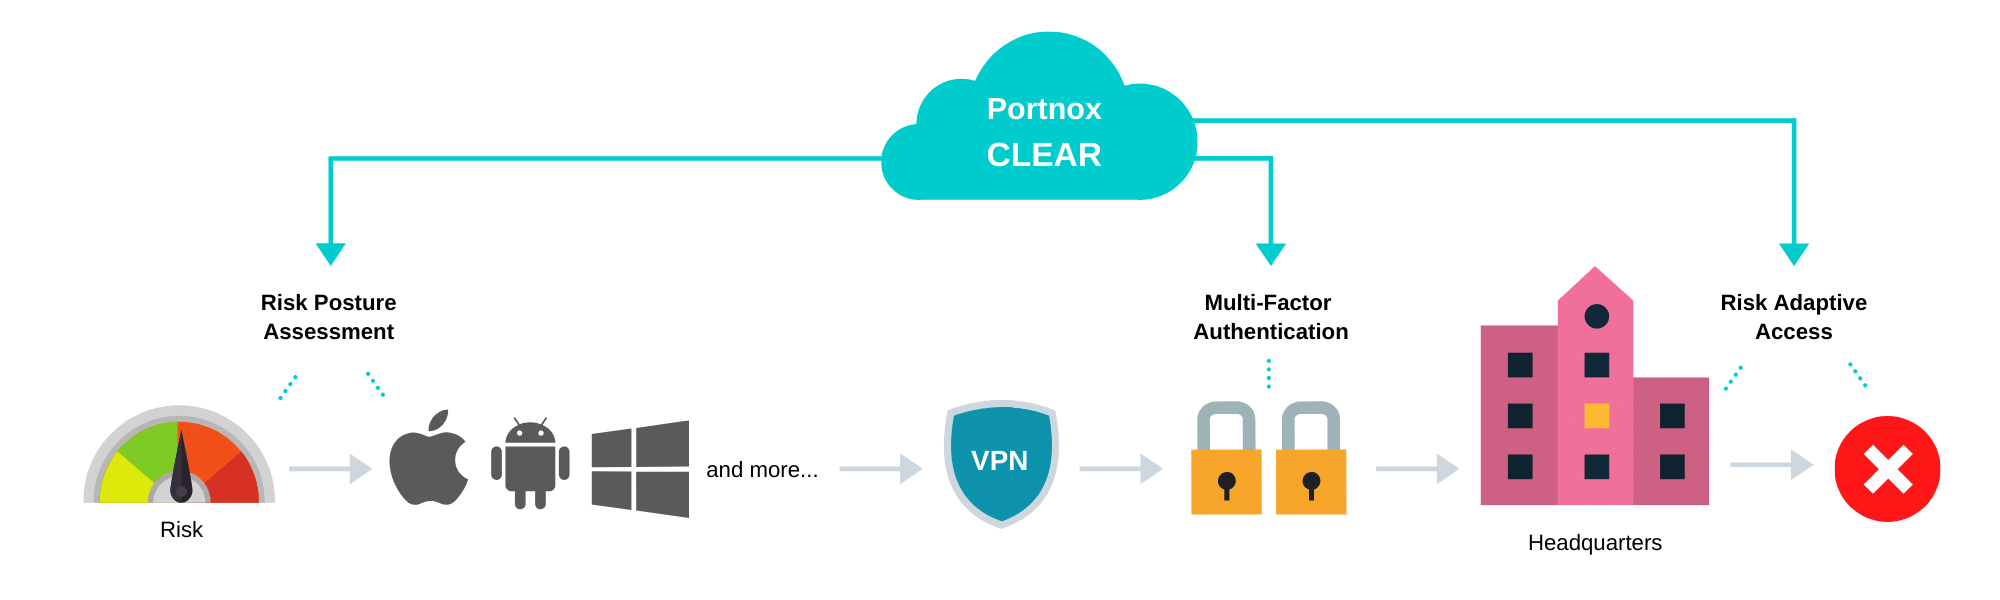 how to secure remote access through VPN with Portnox